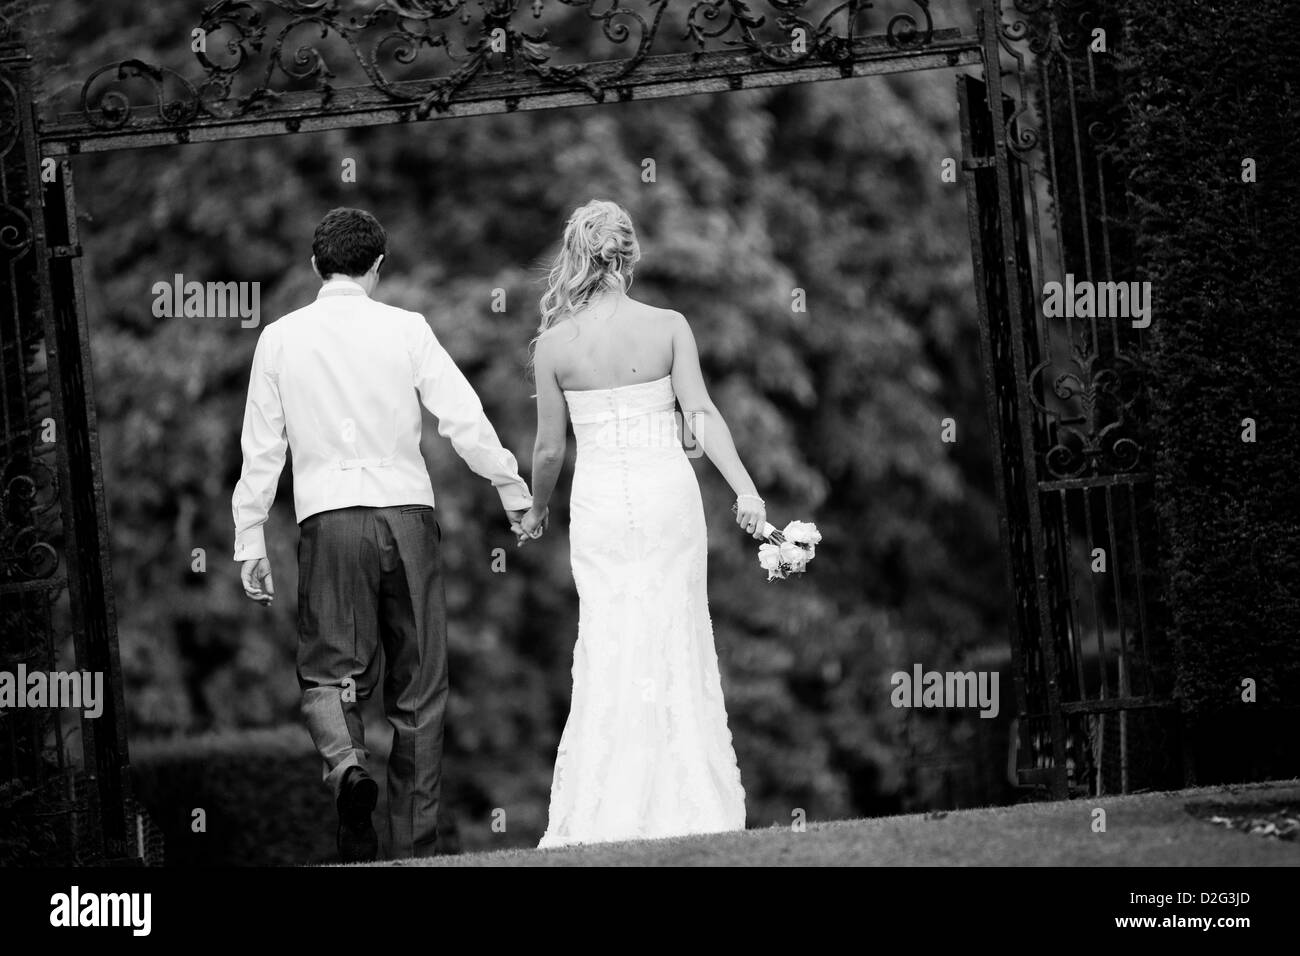 Black and white landscape photo of a Bride and Groom walking away from the camera outside Stock Photo